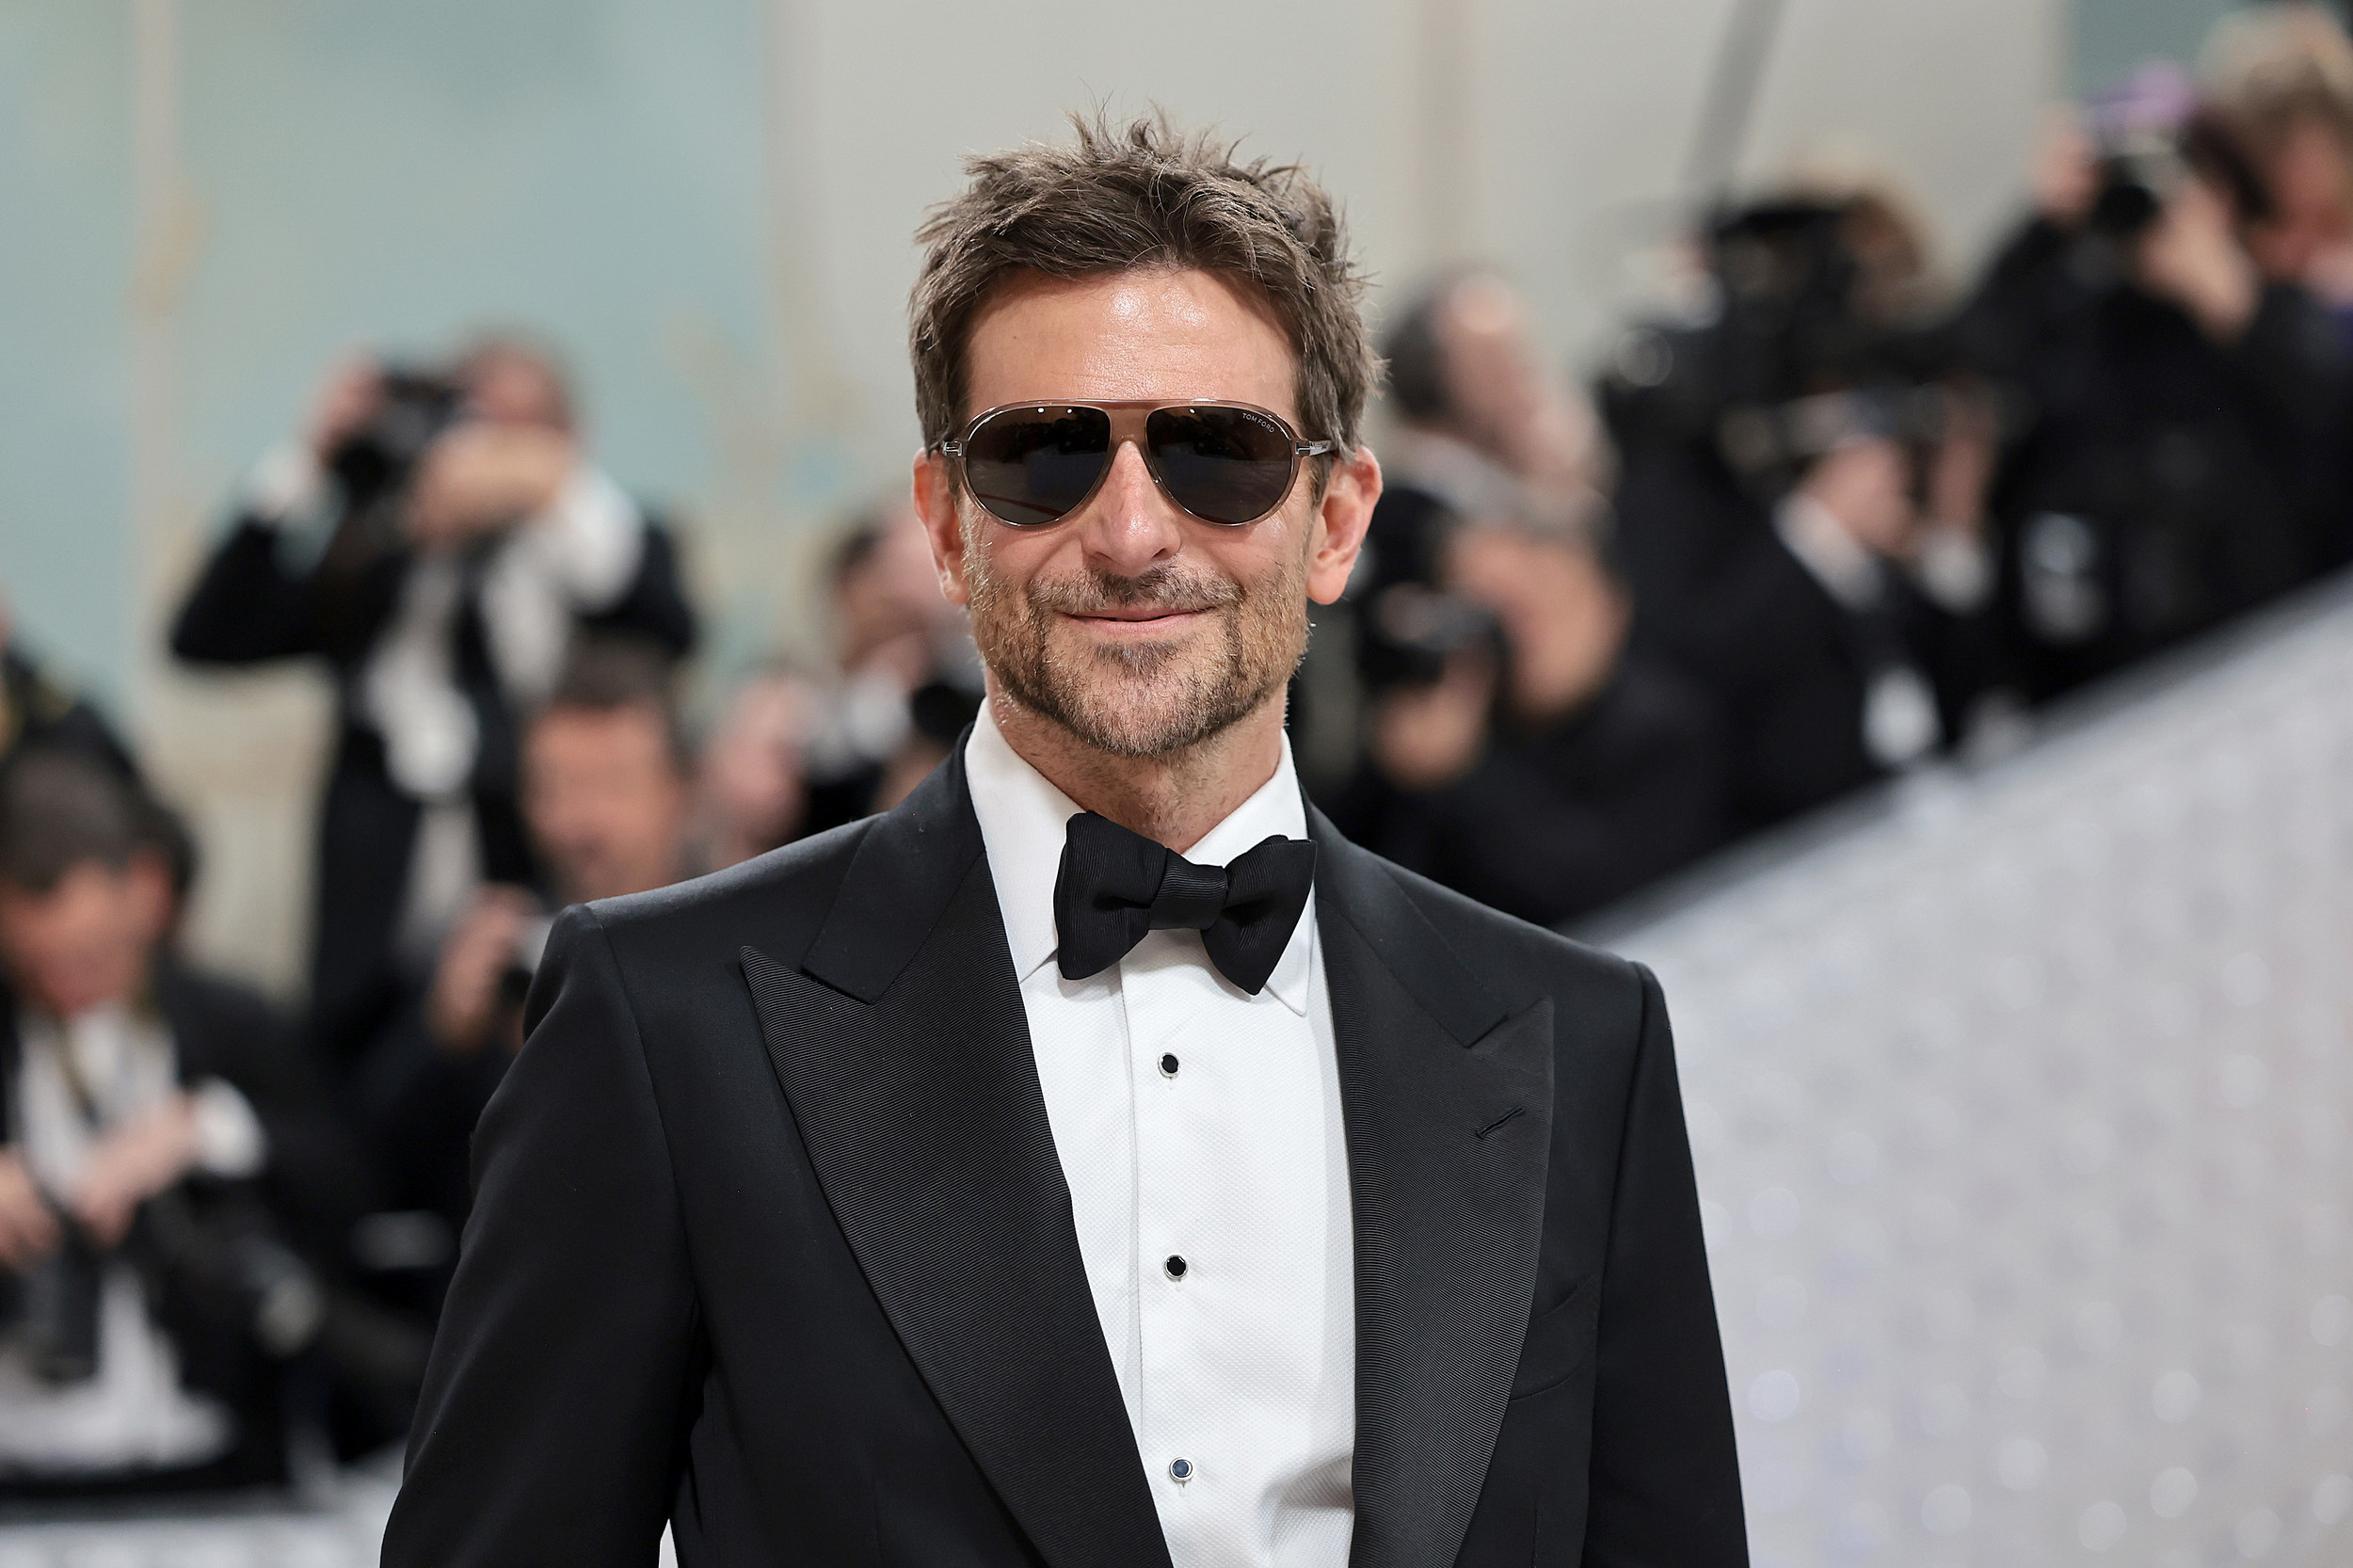 Bradley Cooper's Movies Have Helped Him Build a Solid Net Worth